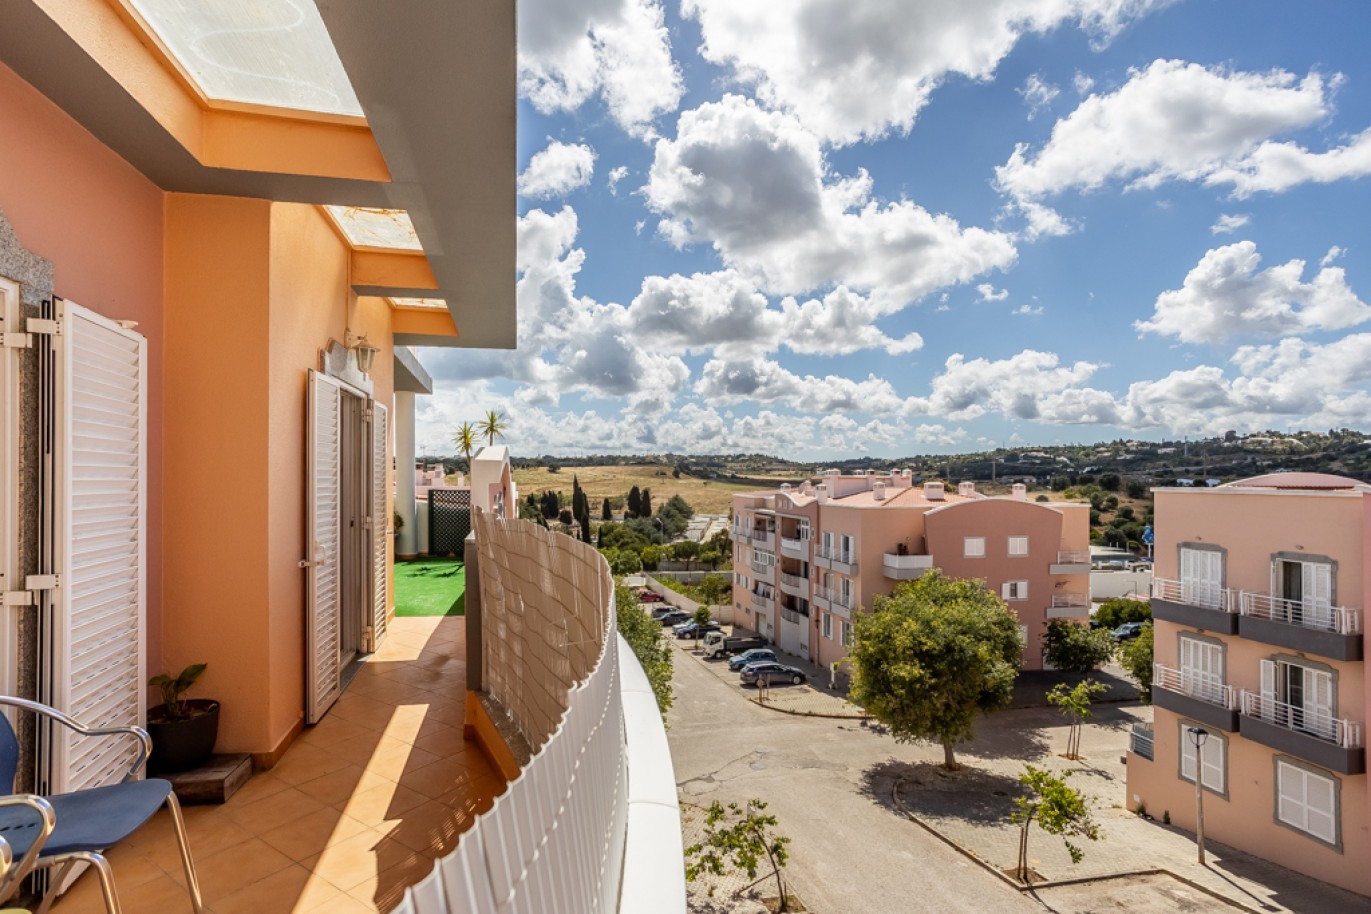 2-Bedroom Appartment with rooftop, for sale in Lagos, Algarve_267191